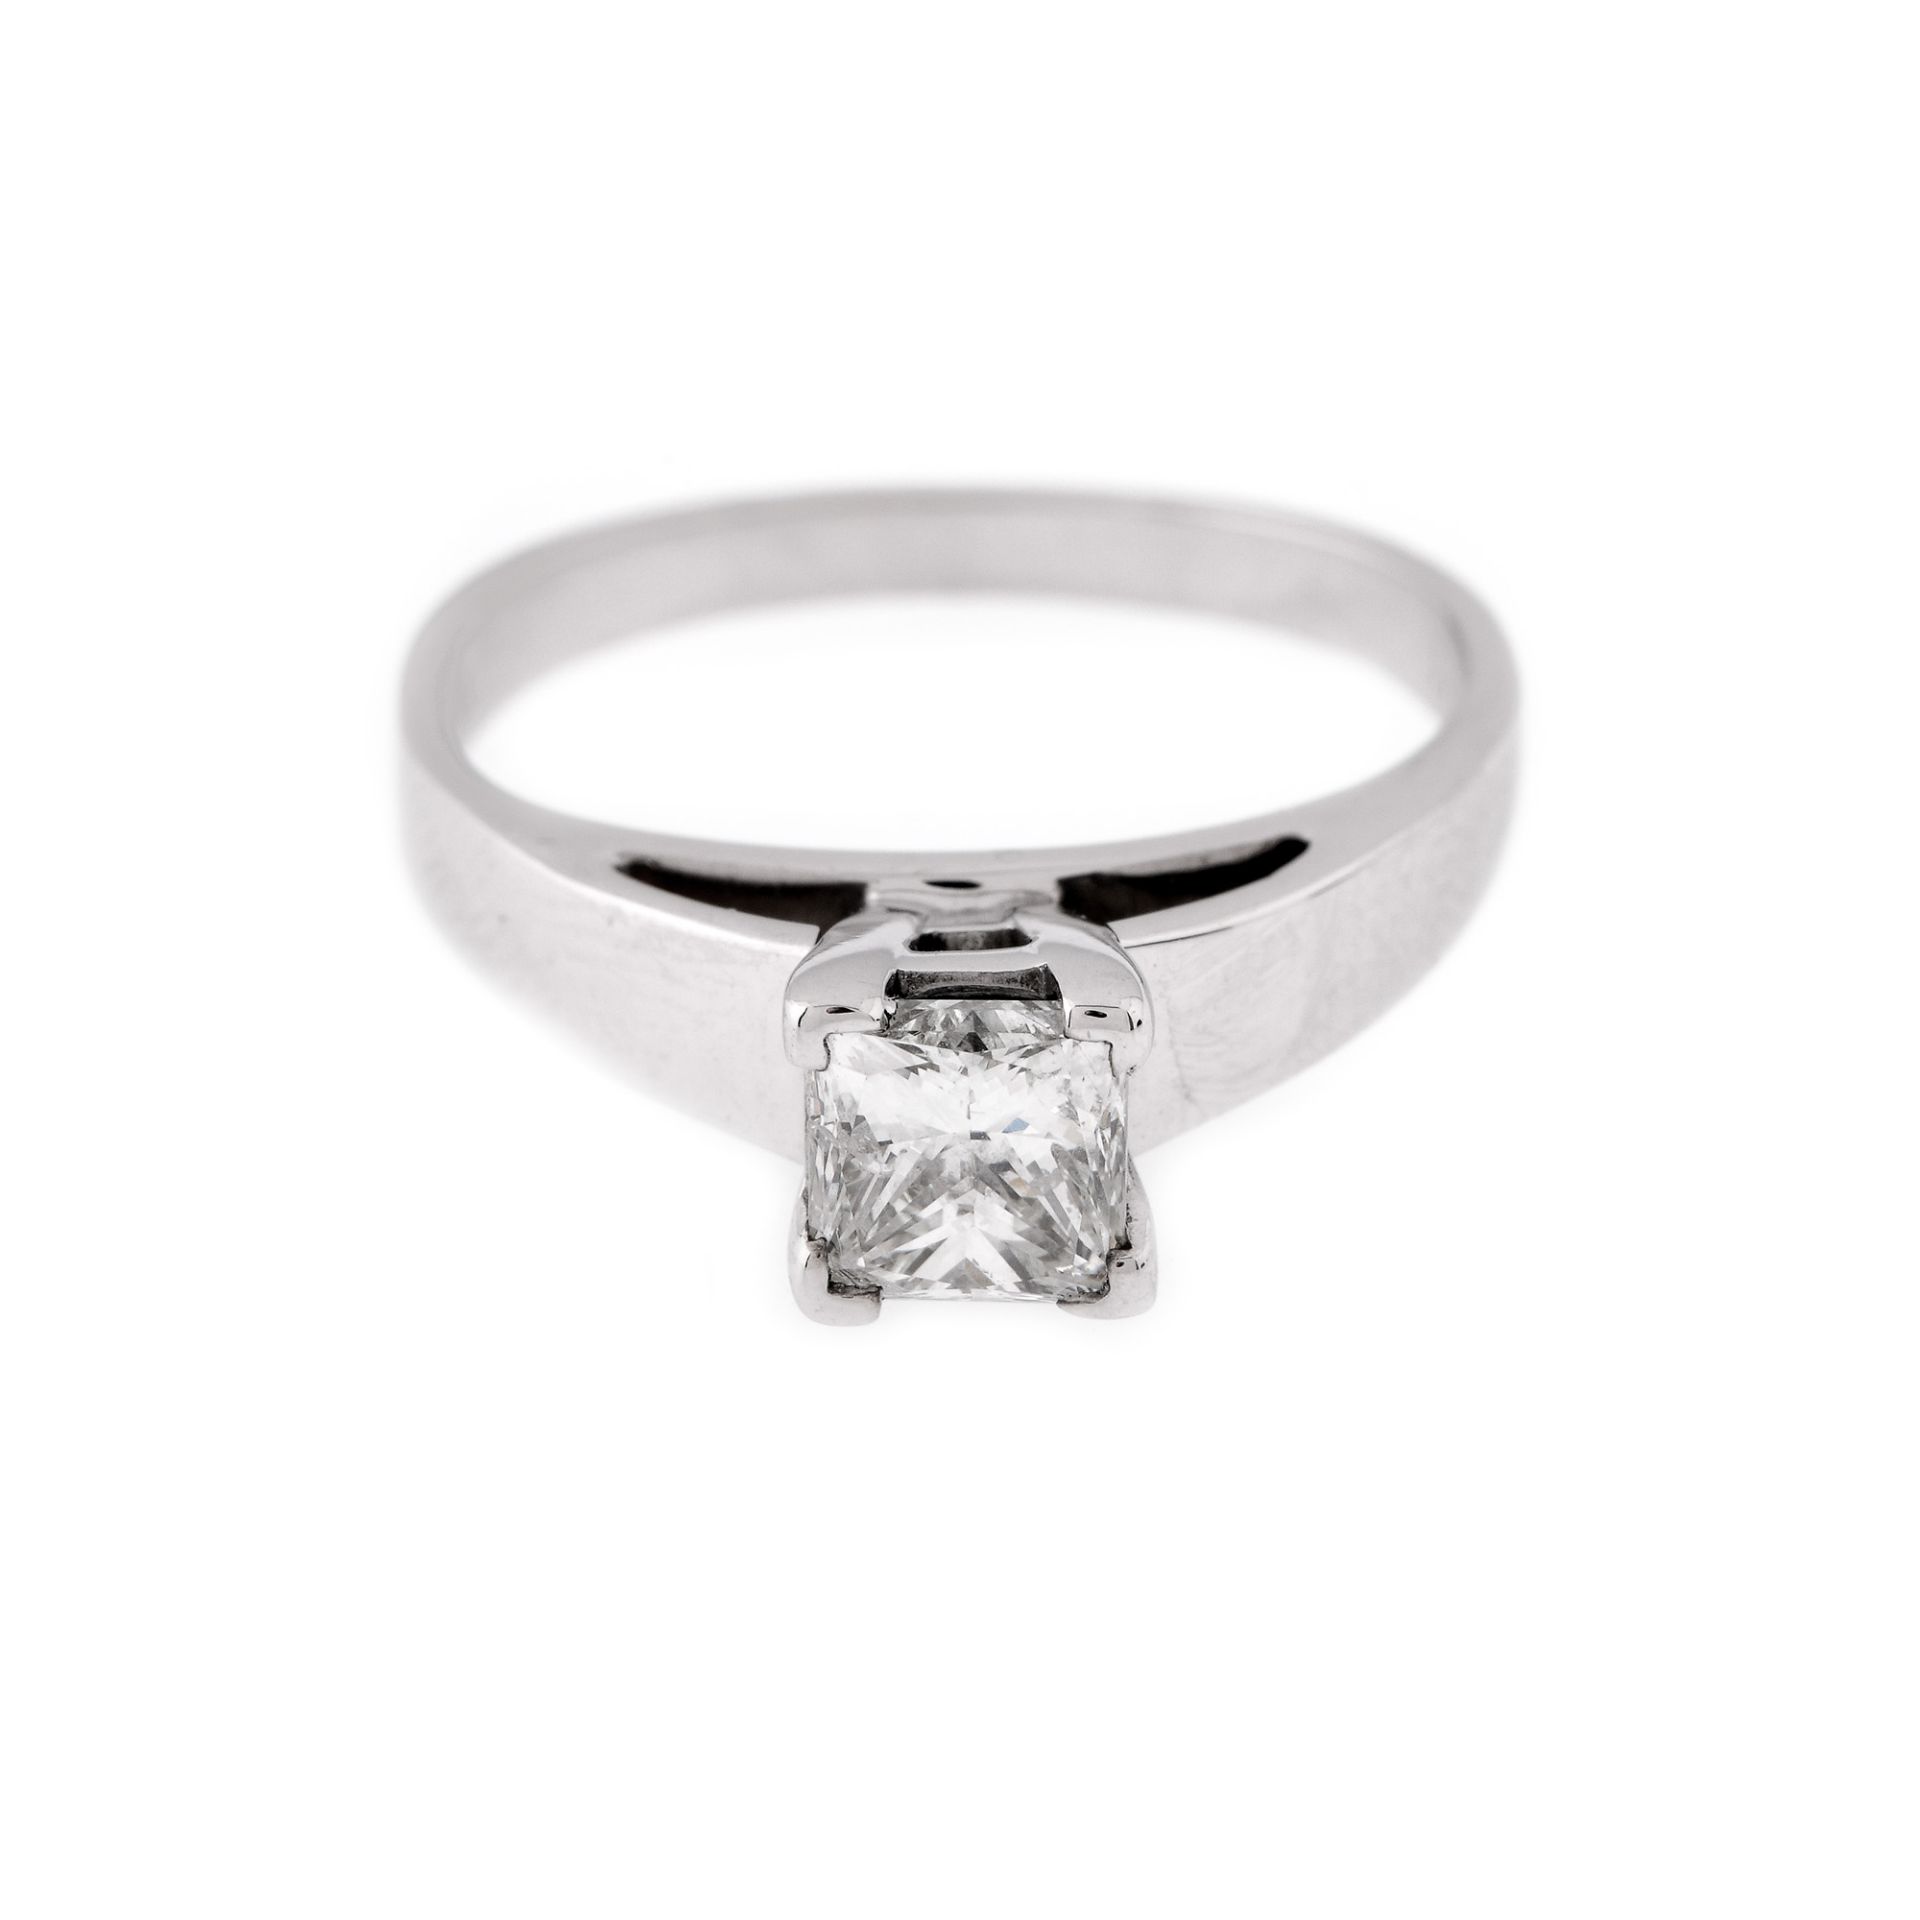 White gold ring, adorned with a solitaire diamond approx. 1.02 ct